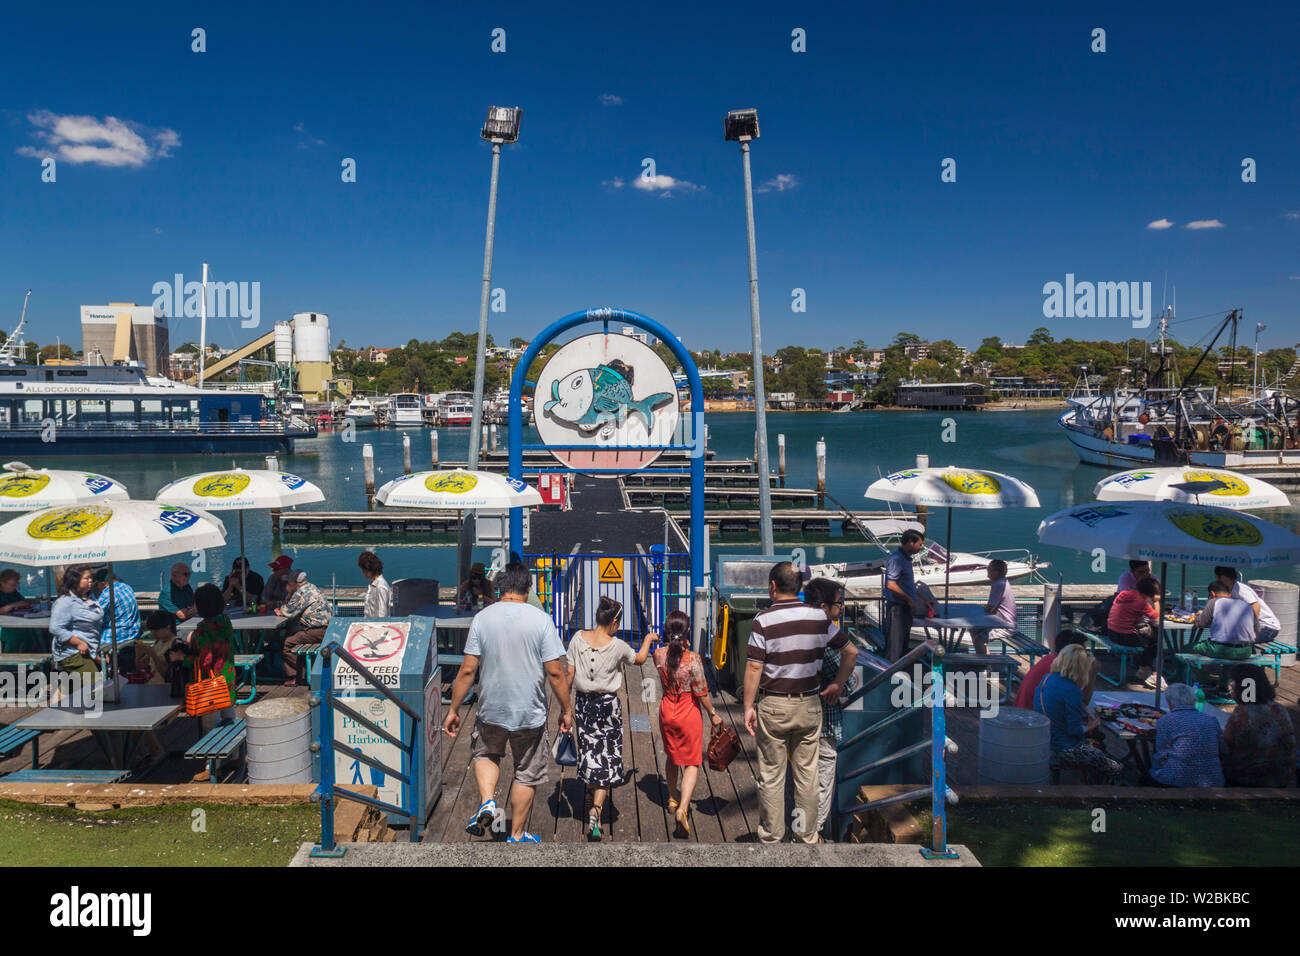 Australien, New South Wales, New South Wales, Sydney, Sydney Fish Market, Outdoor diging Stockfoto